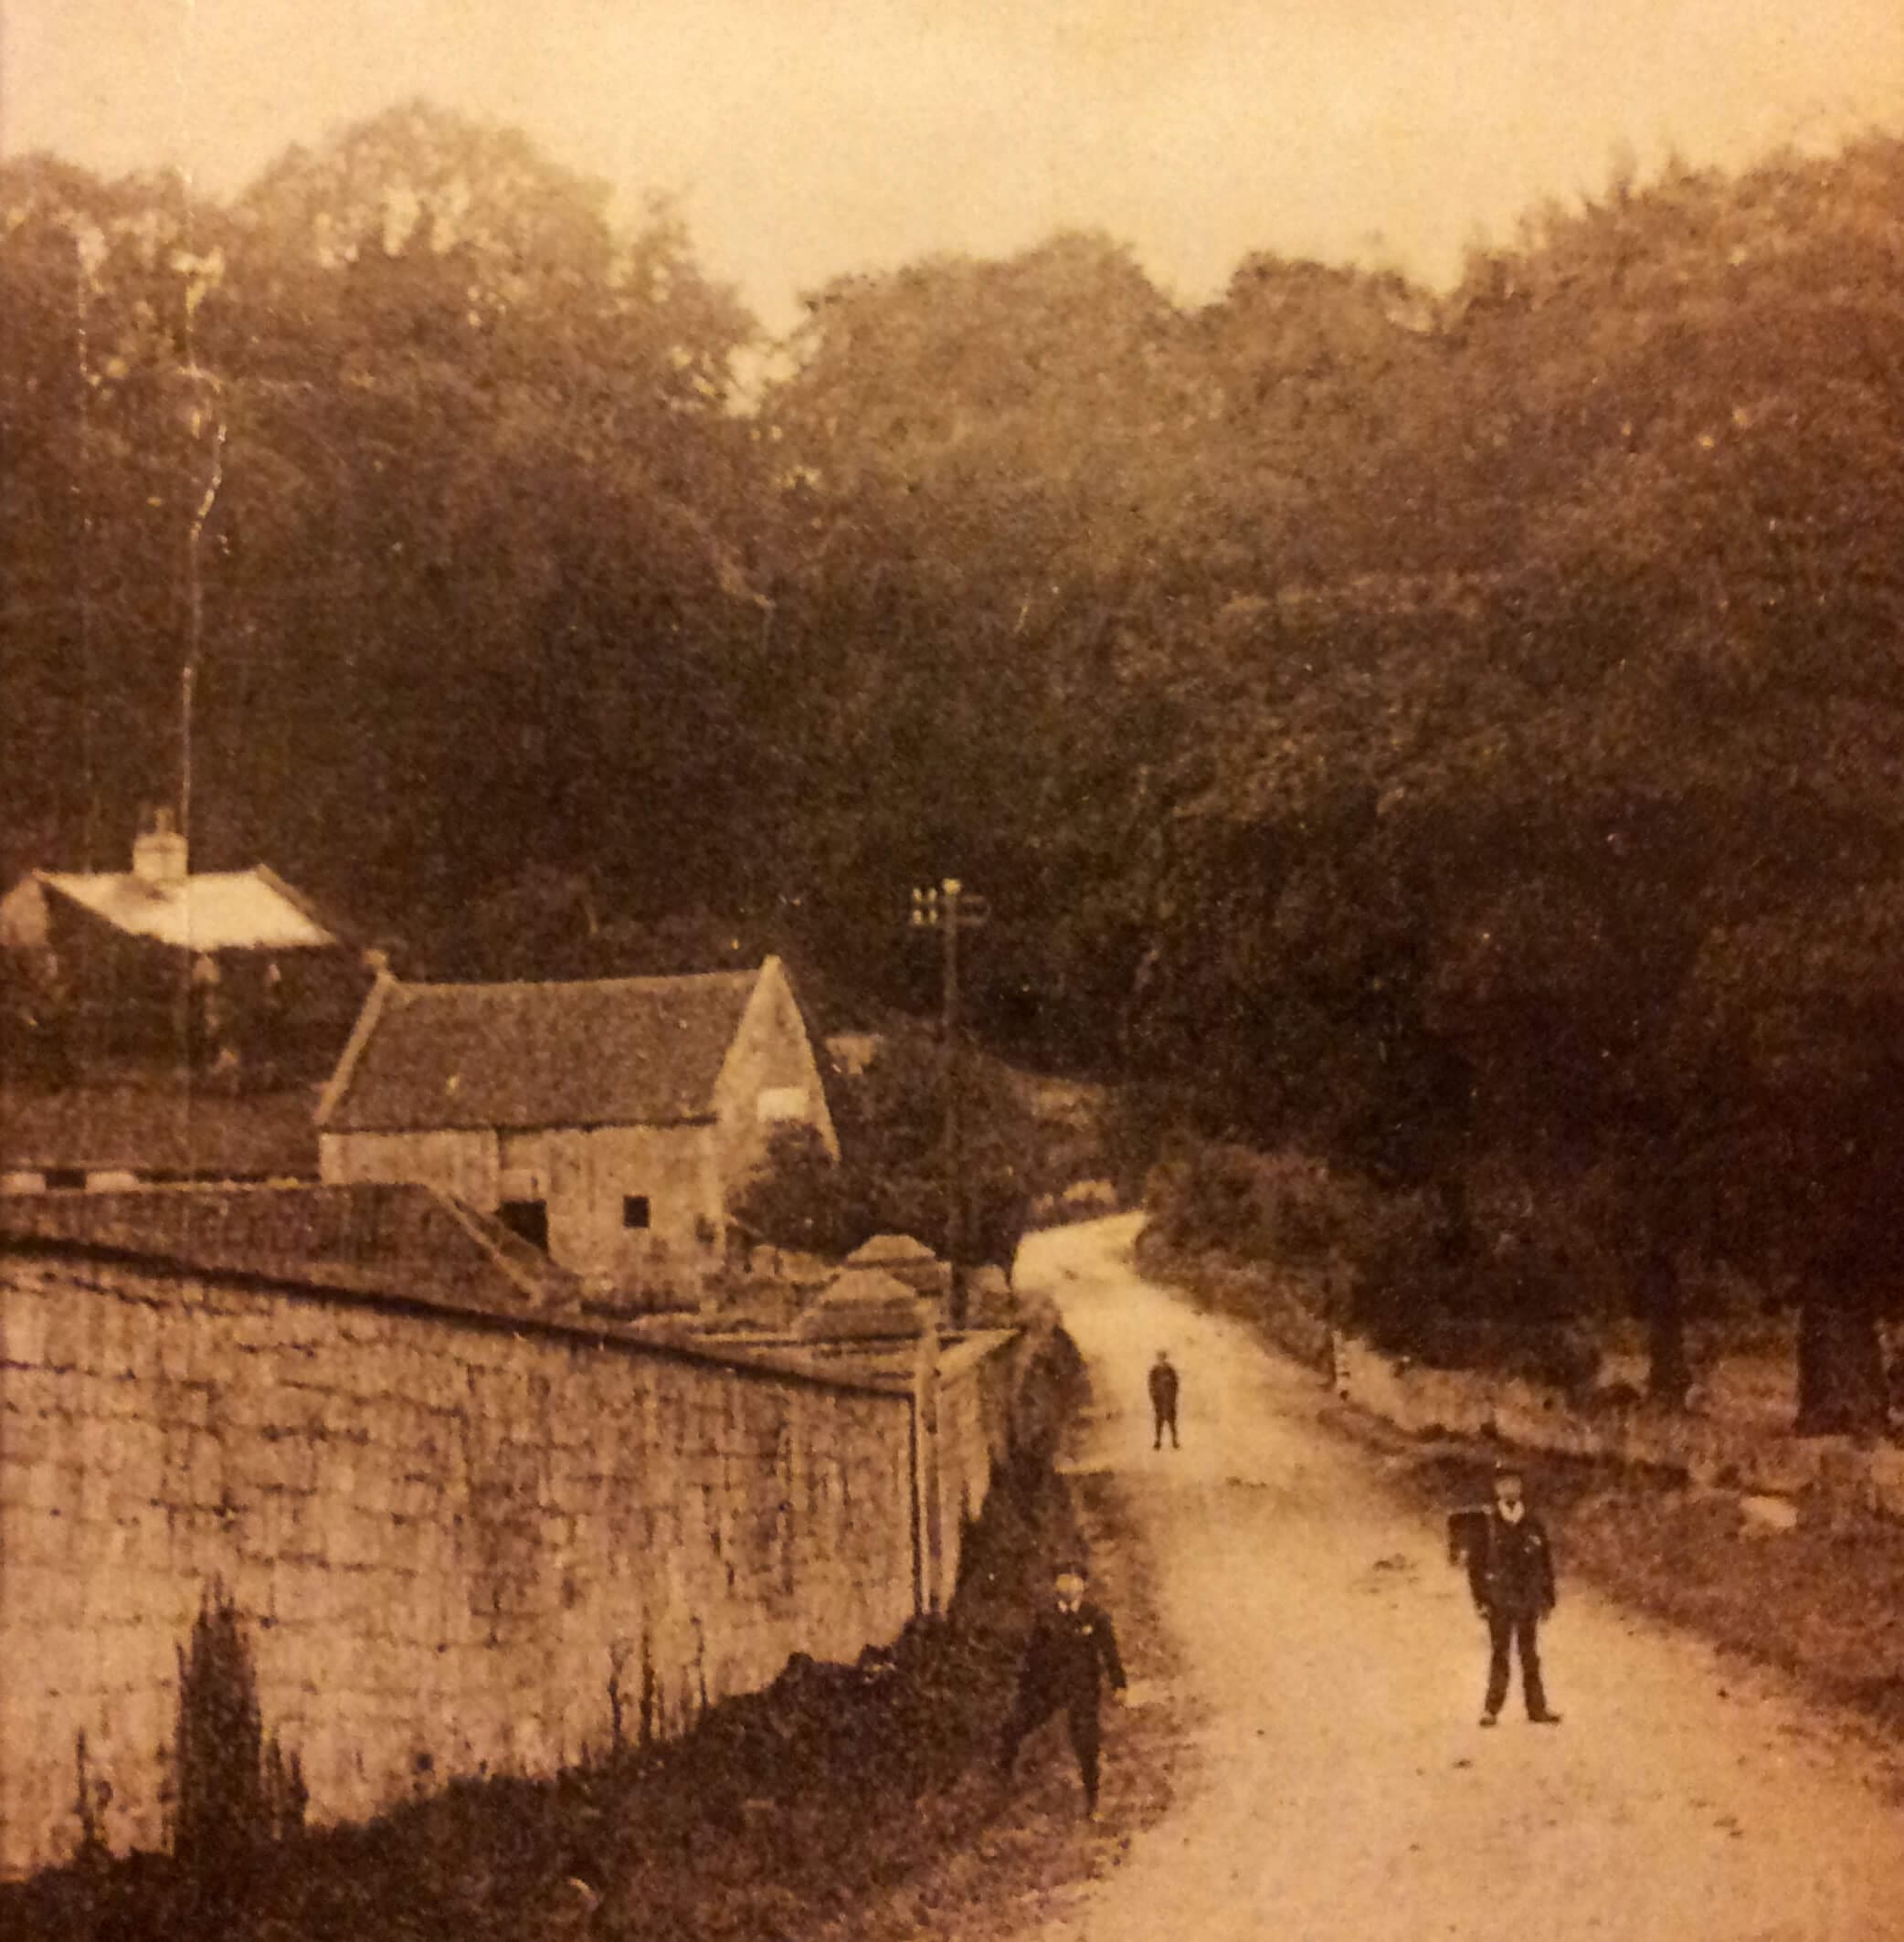 Summer Lane, Combe Down, early 1900s